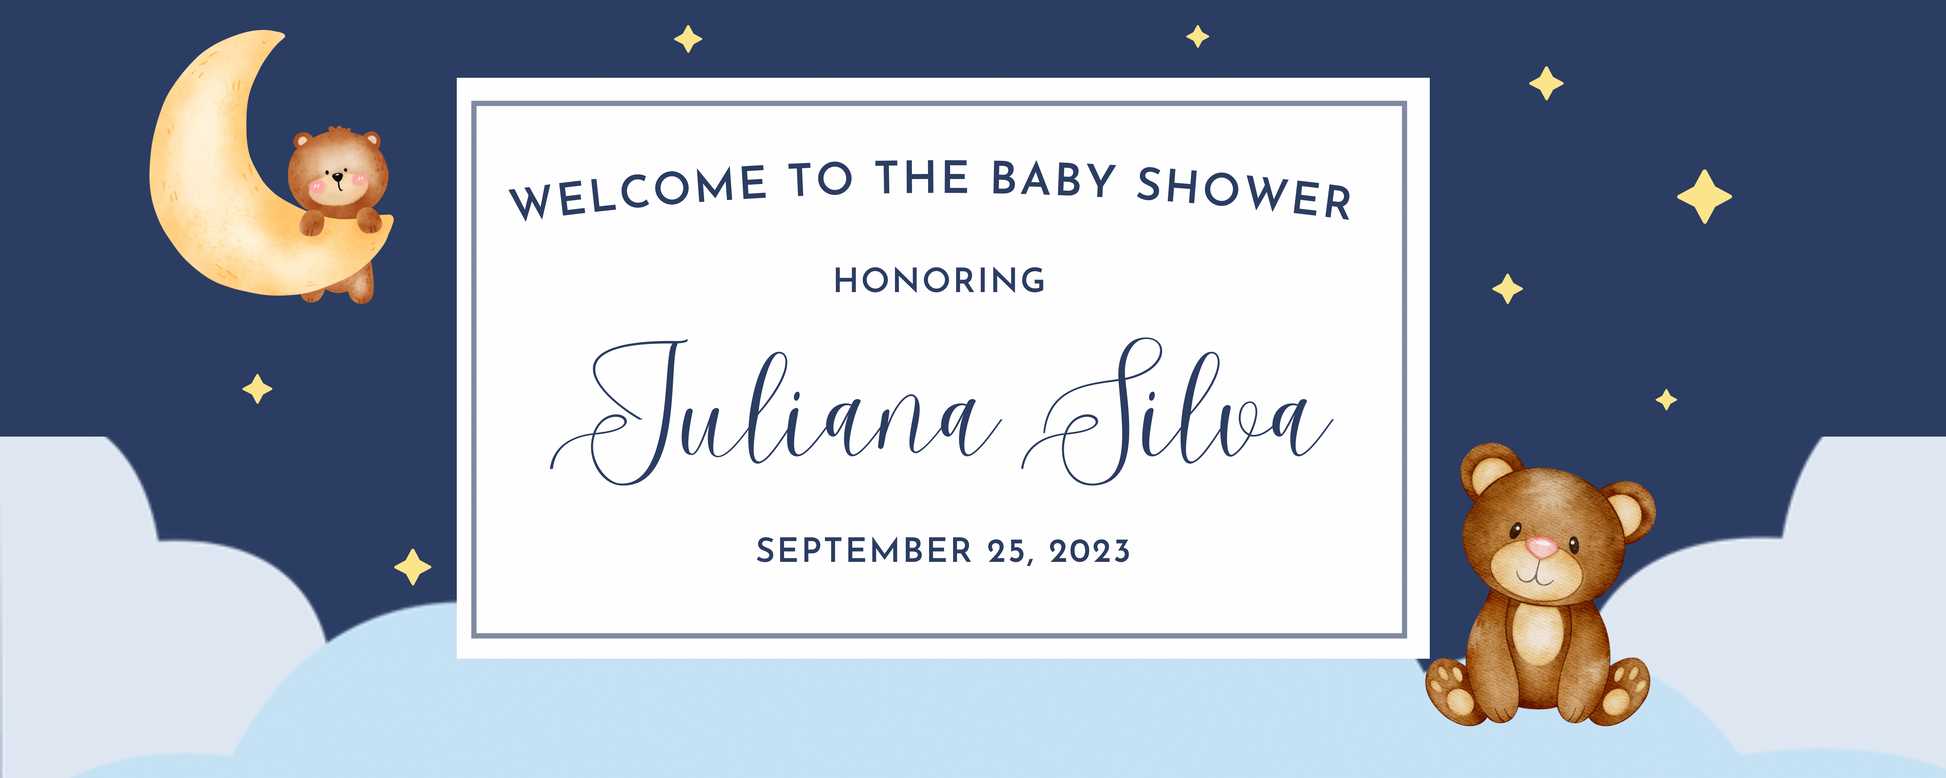 Baby Shower Banner 60”x24”, Full Color, 8 Designs to Choose from. - Professional Artwork